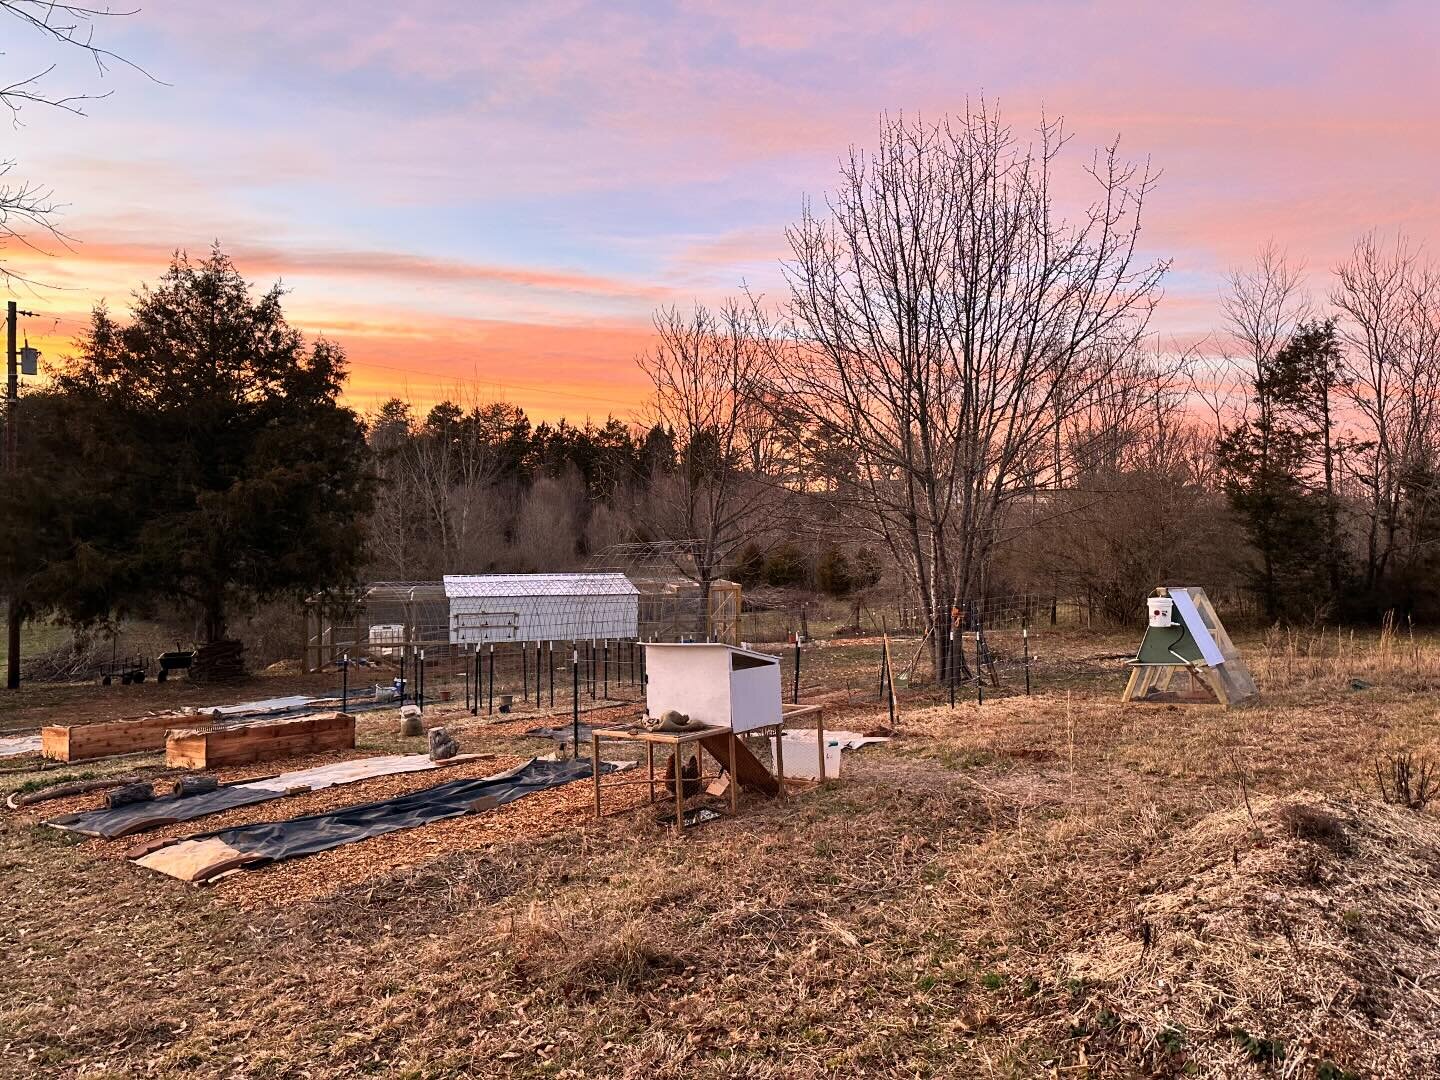 For a long time I dreamed of what our future farm would look like, where it would be, the sunsets it would have. Then when we were trying to buy this house &amp; were shuttling back and forth every night from the campground in South Carolina to fix w